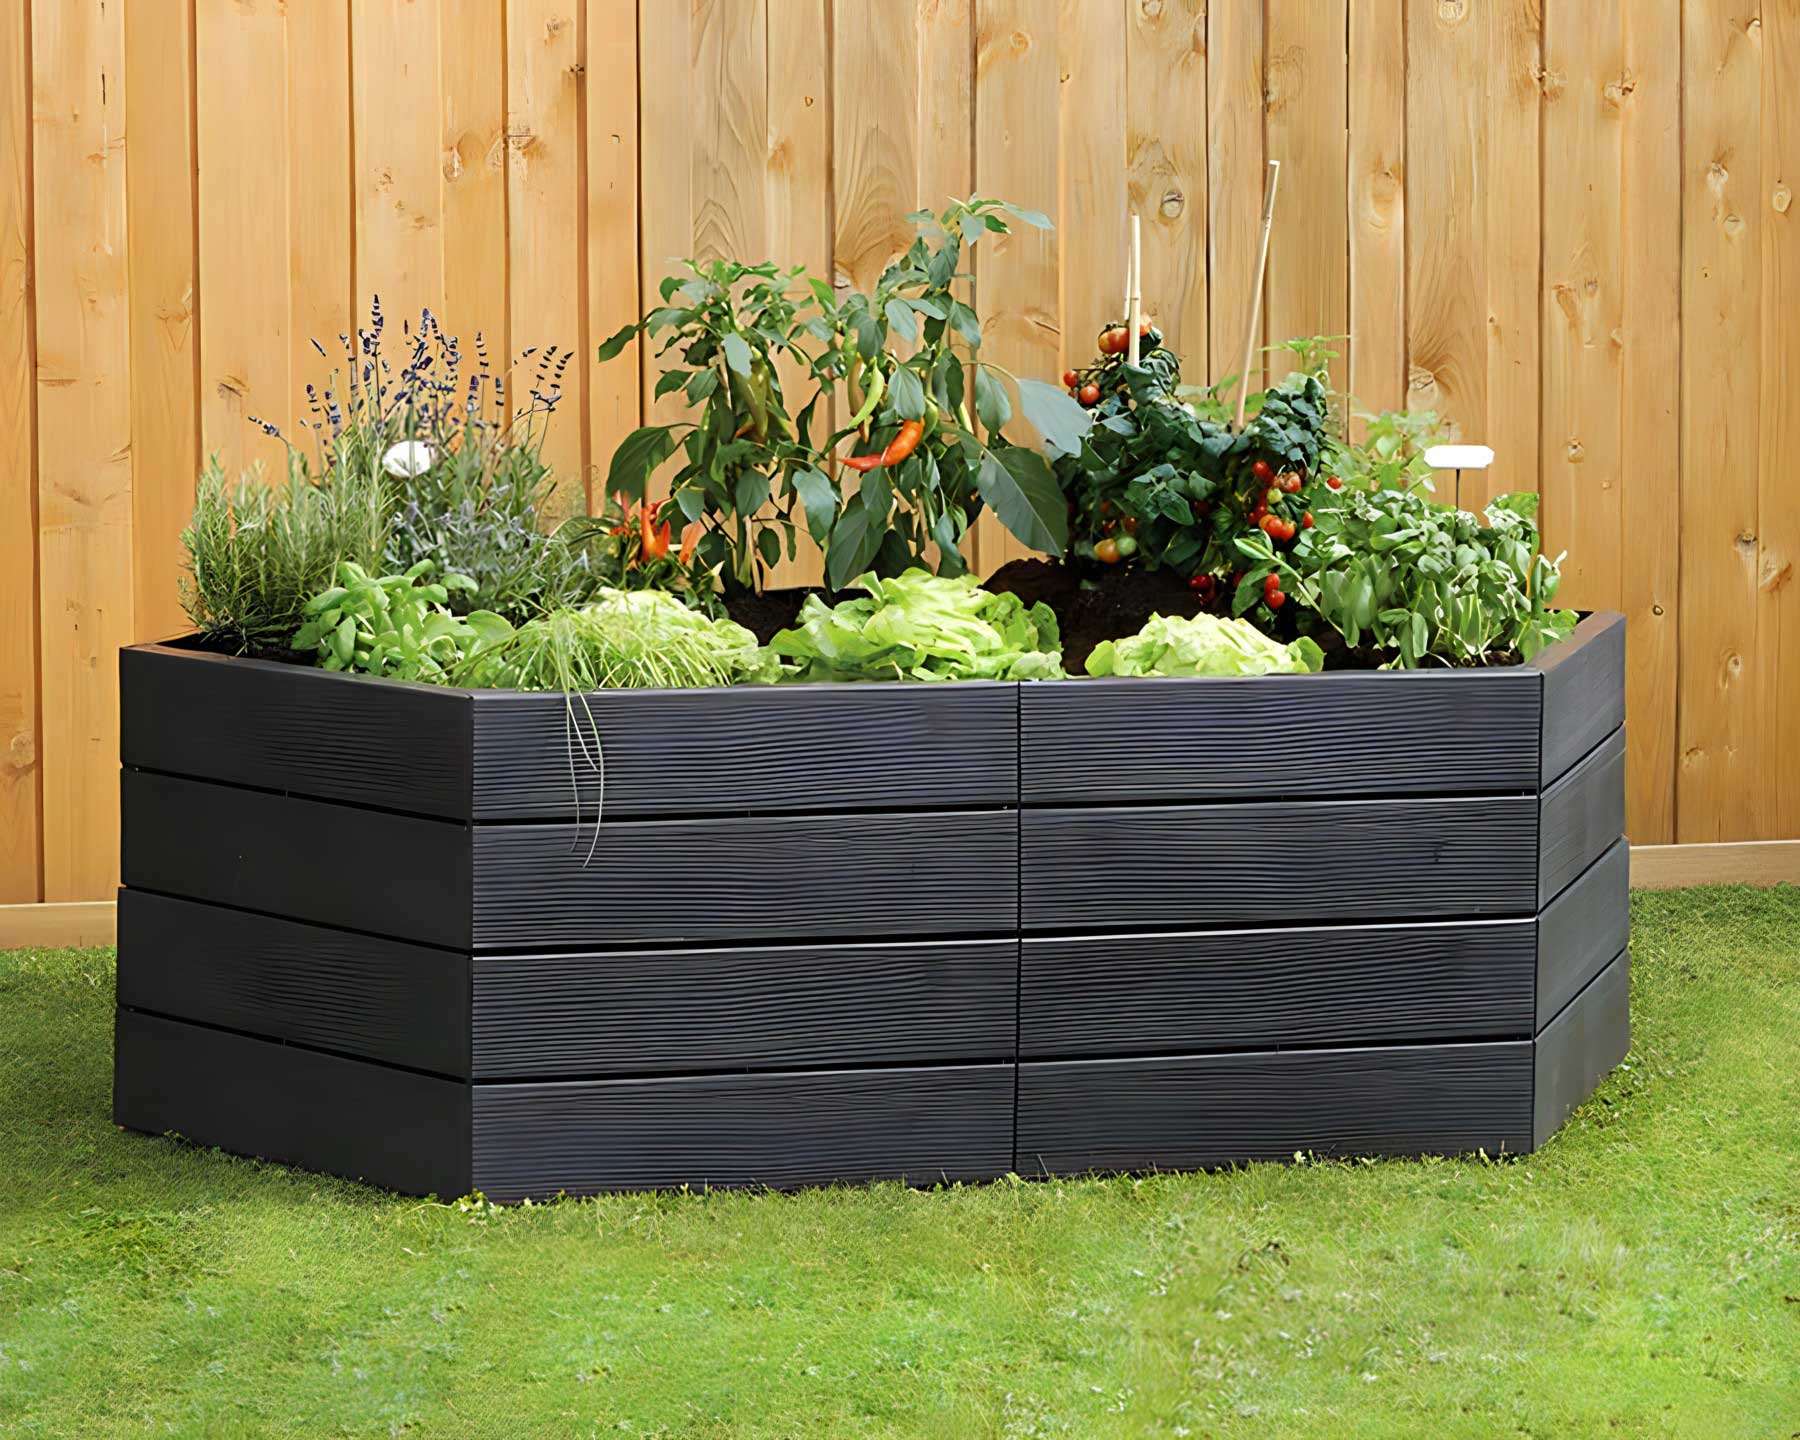 Ergo raised garden beds. This unit as illustrated is made up of 2 x 6 panel kits and 2 x extension sets.